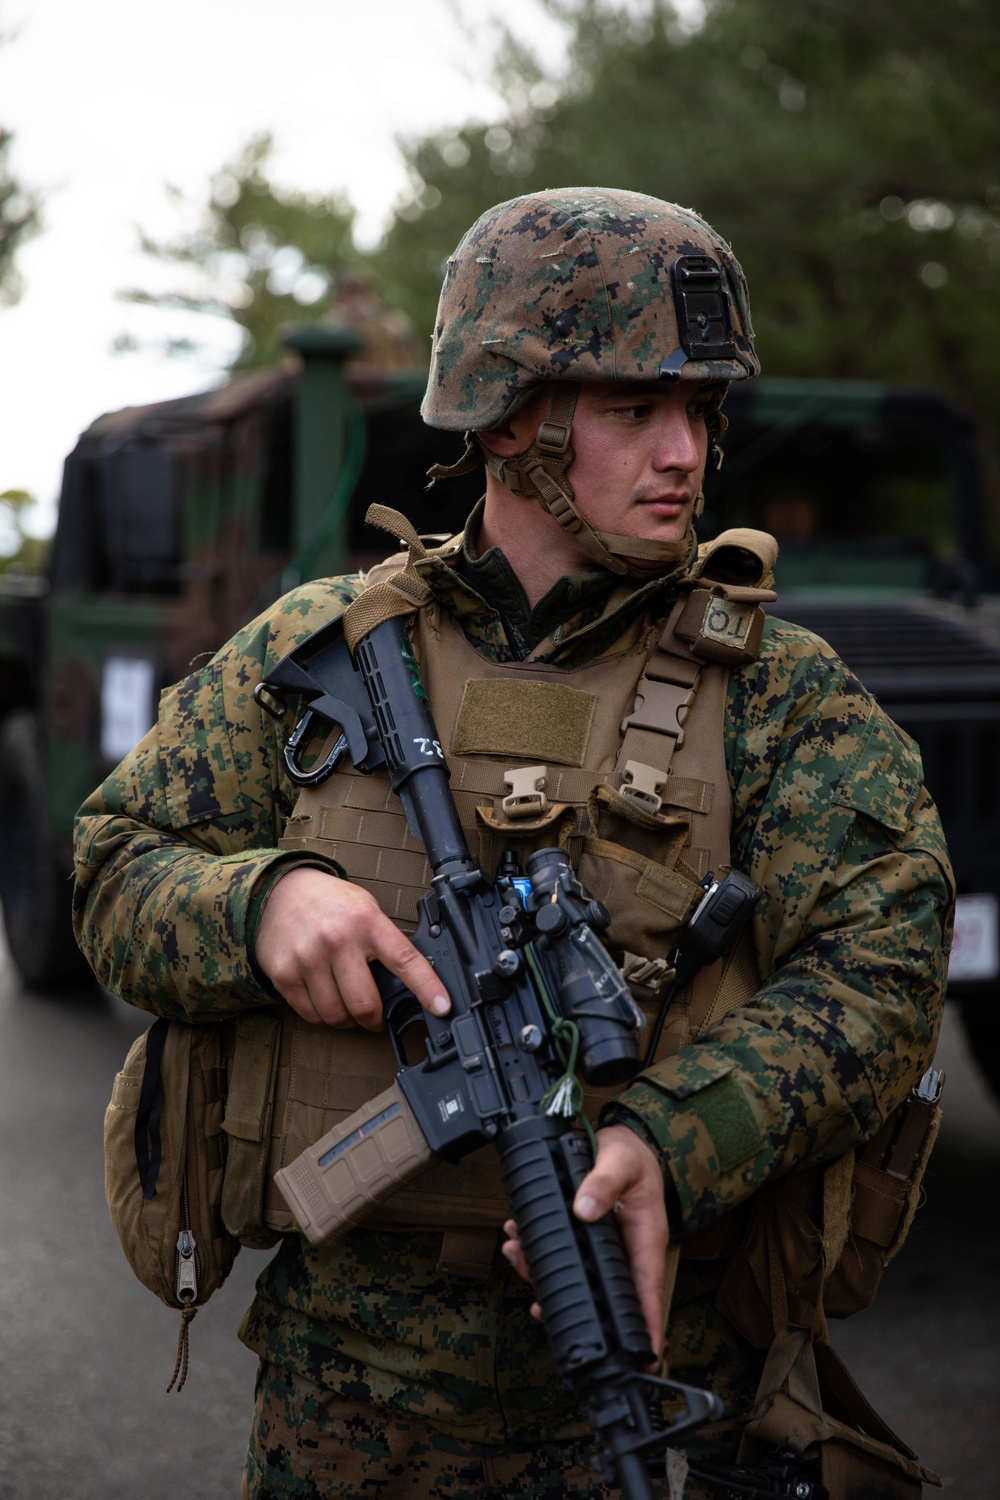 CLR-37 Marines participate in a simulated vehicle and casualty recovery mission